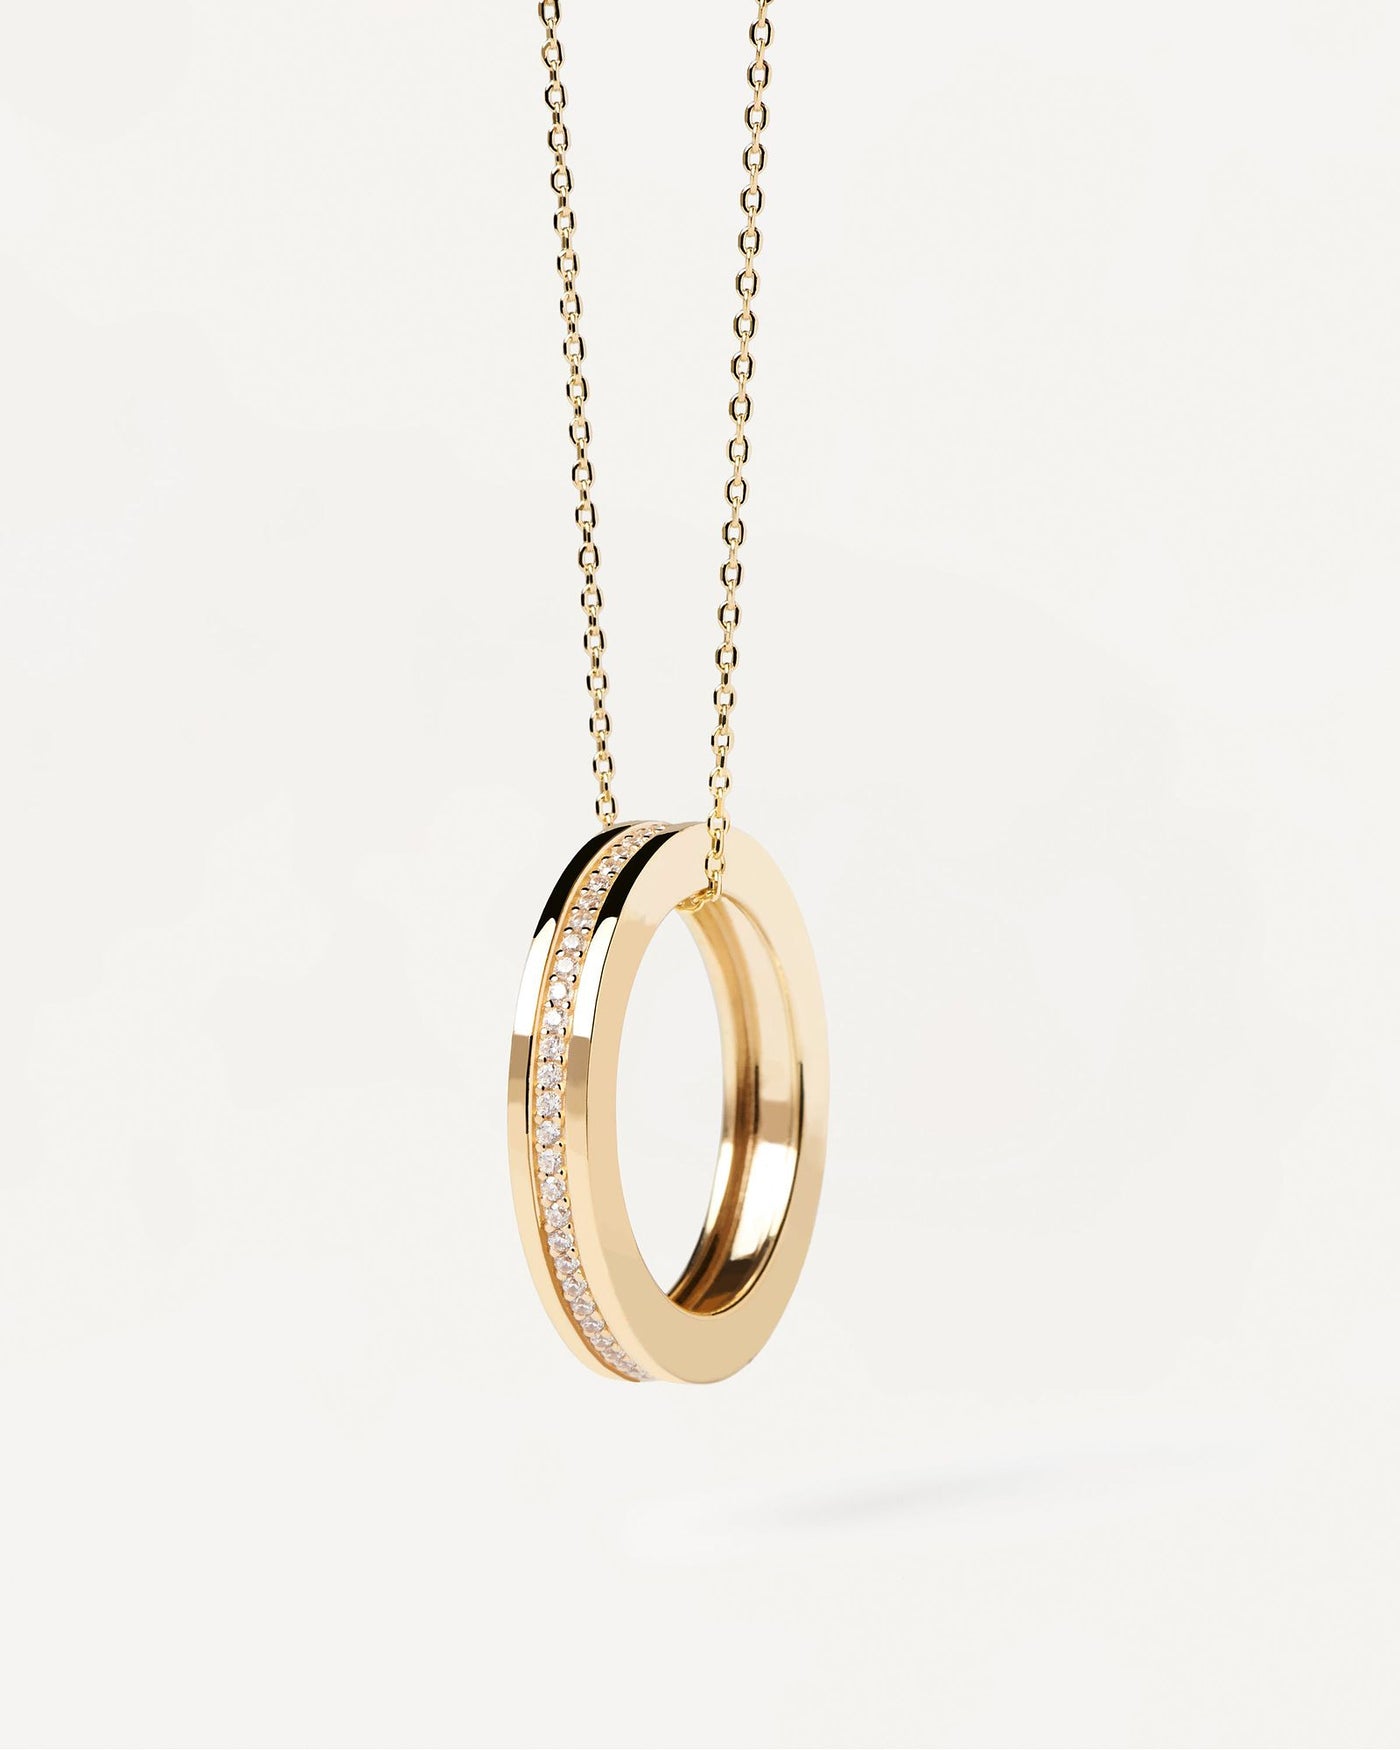 2024 Selection | Infinity Necklace. Gold-plated necklace with ring pendant. Get the latest arrival from PDPAOLA. Place your order safely and get this Best Seller. Free Shipping.